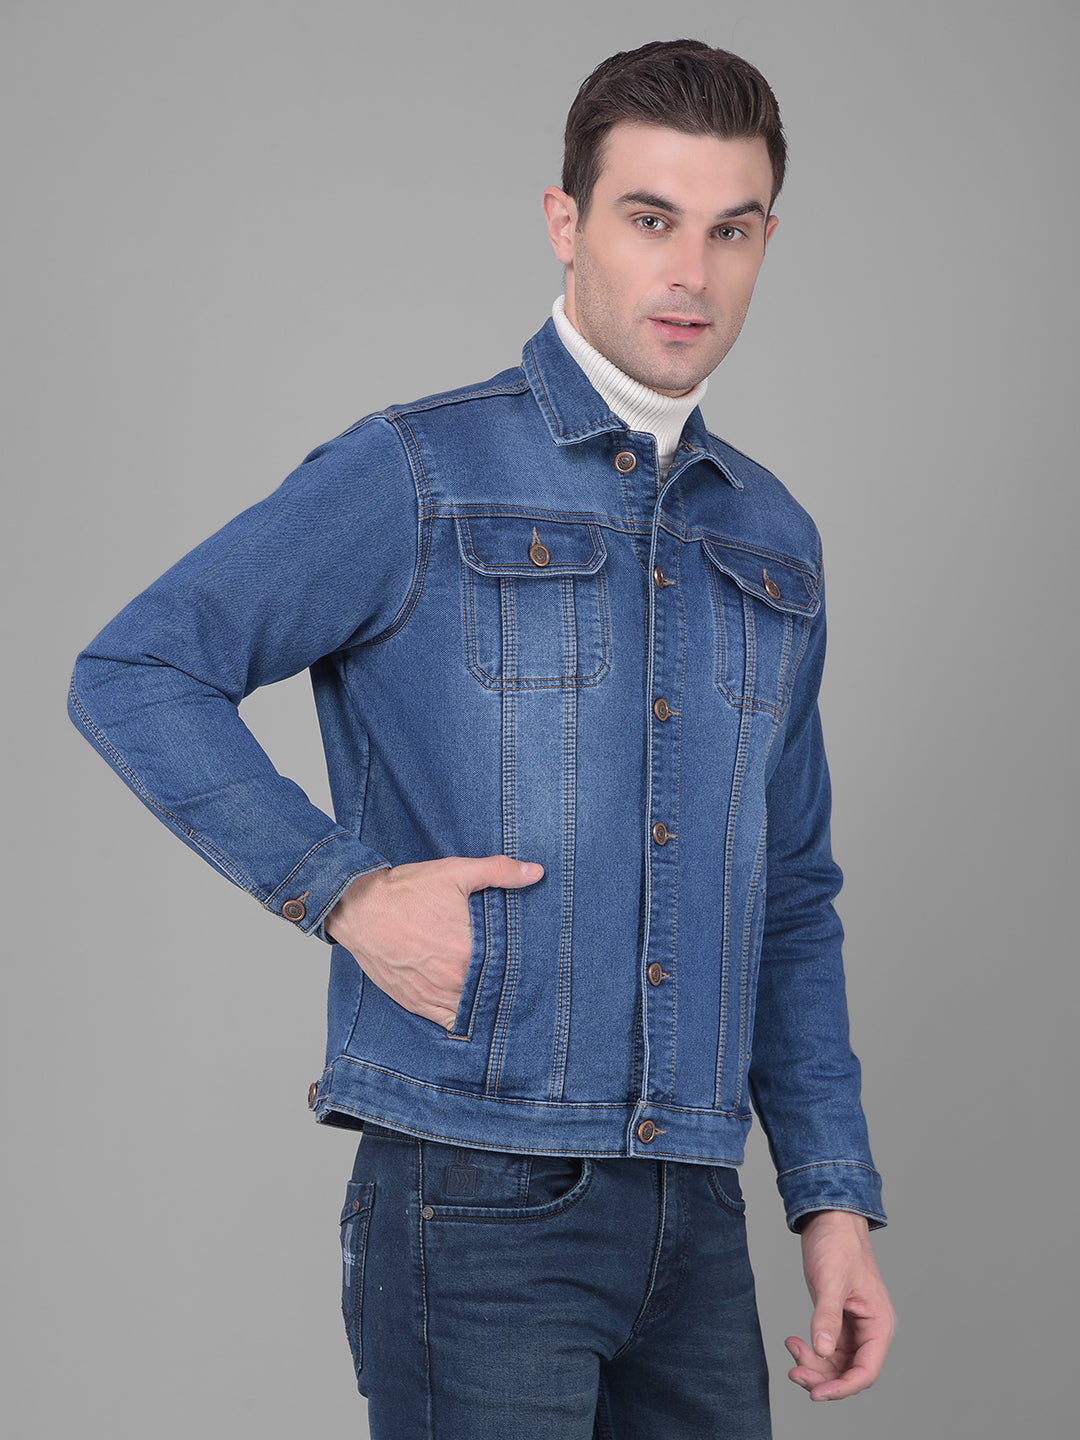 SLAY. Men's Full Sleeves Blue Solid Button-Down Washed Light Blue Denim  Jacket with Faux-fur Lining